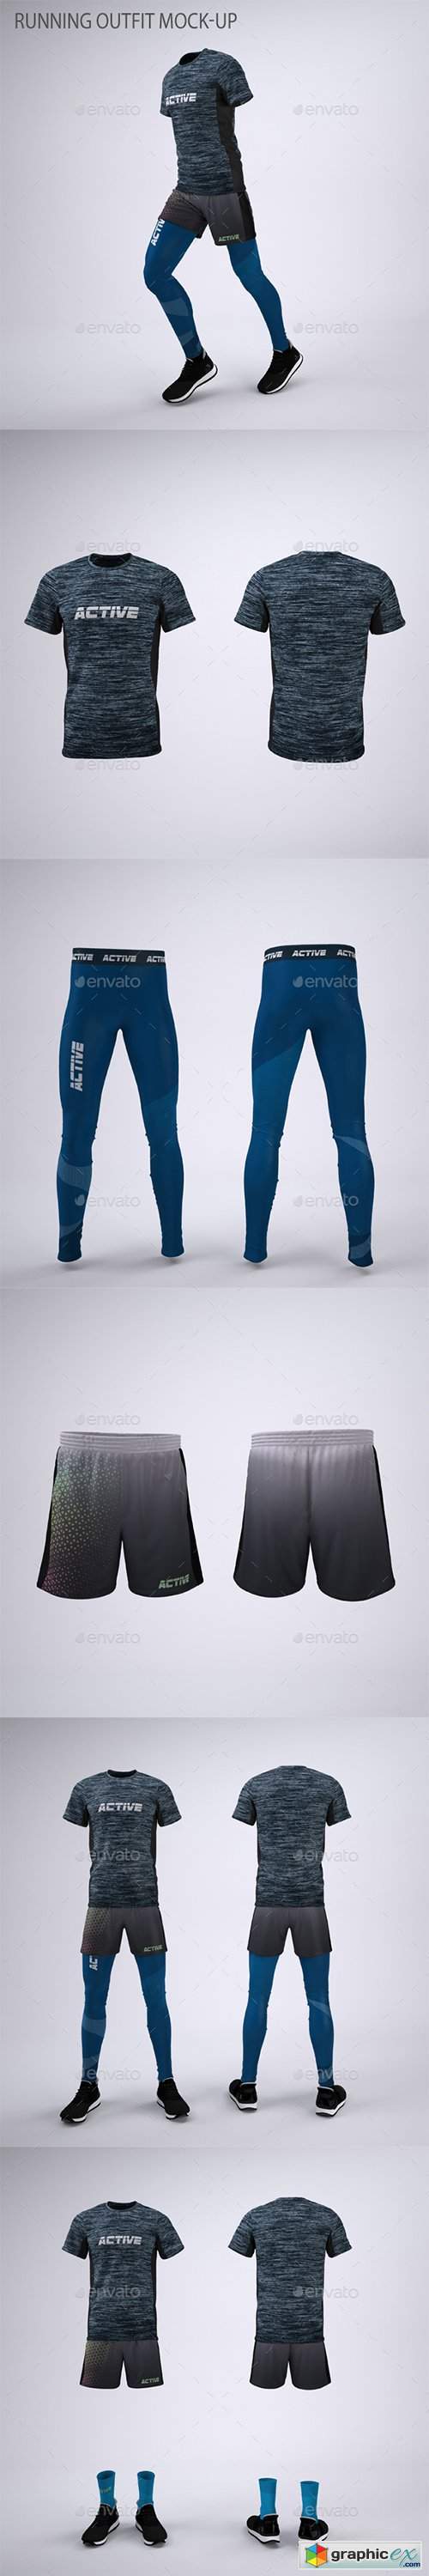 Running Outfit Mock-Up